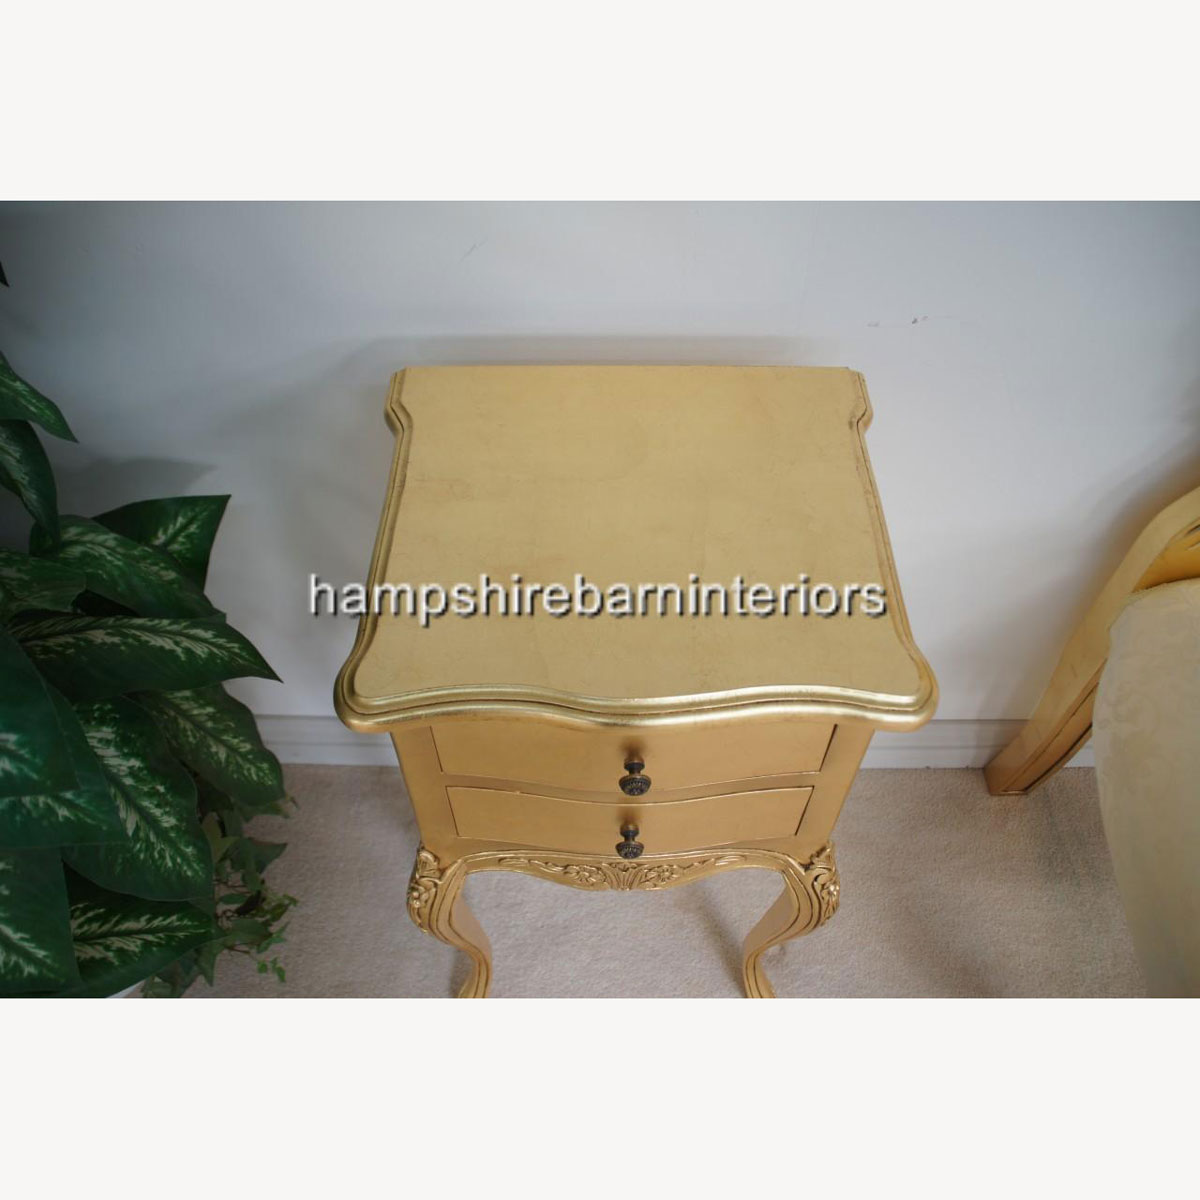 Beautiful Parisian Ornate Two Drawer Lamp Side Table Or Bedside Cabinet Shown In Gold Leaf 4 - Hampshire Barn Interiors - Beautiful Parisian Ornate Two Drawer Lamp Side Table Or Bedside Cabinet Shown In Gold Leaf -